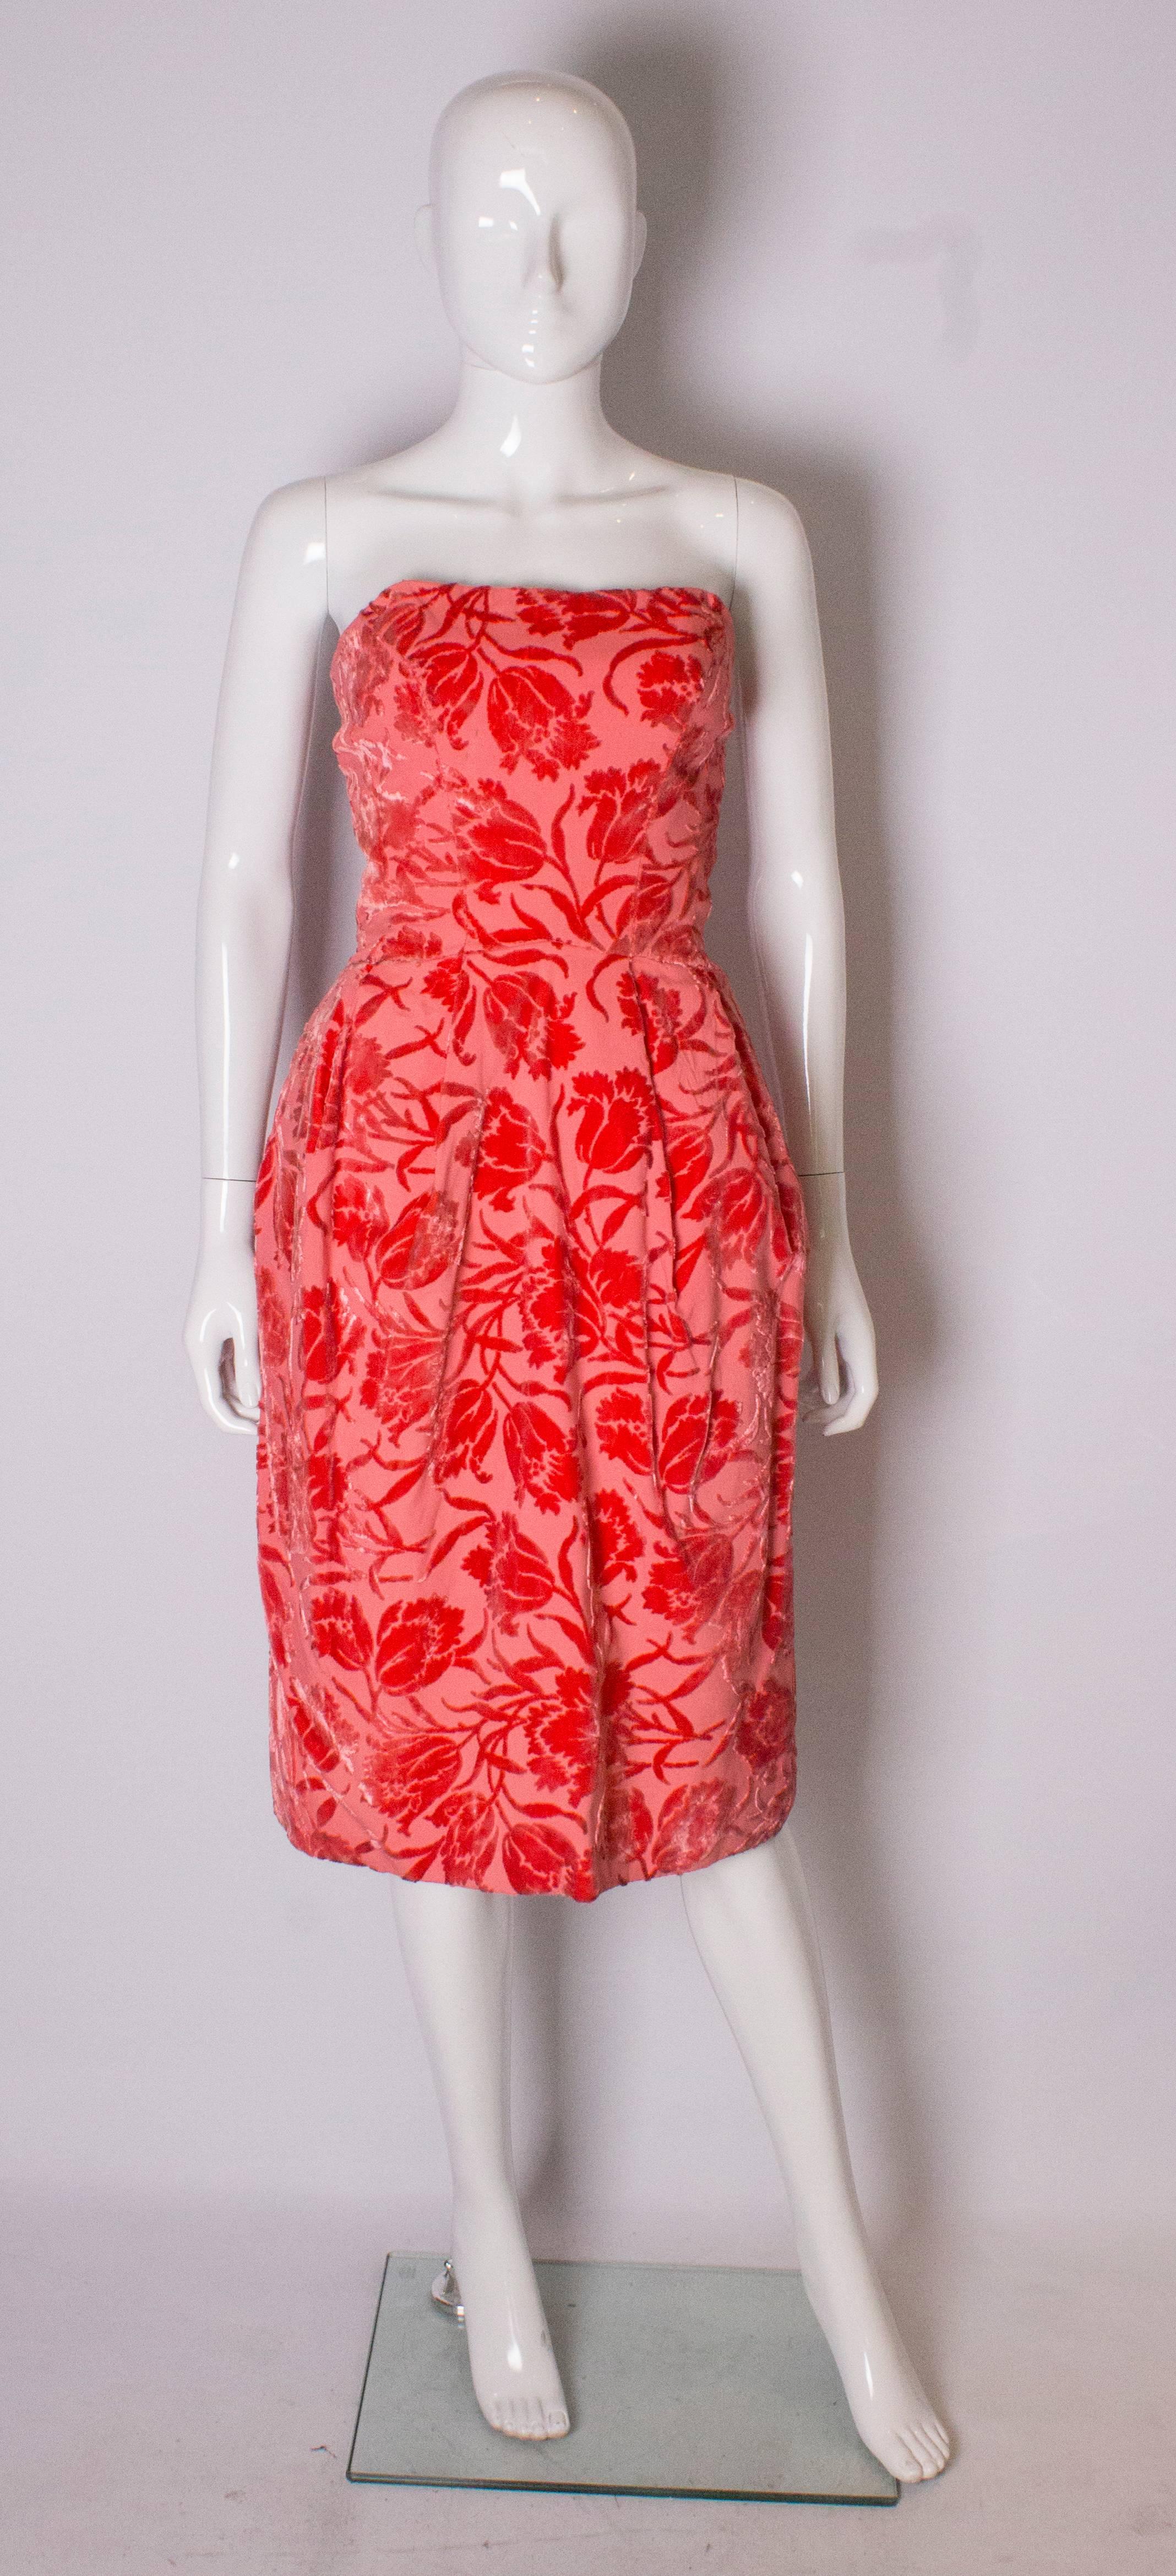 A pretty vintage party dress in a coral pink coloured devore velvet. The dress is boned at the bust area, has a tulip shape skirt, and  is fully lined,with a central back zip.

